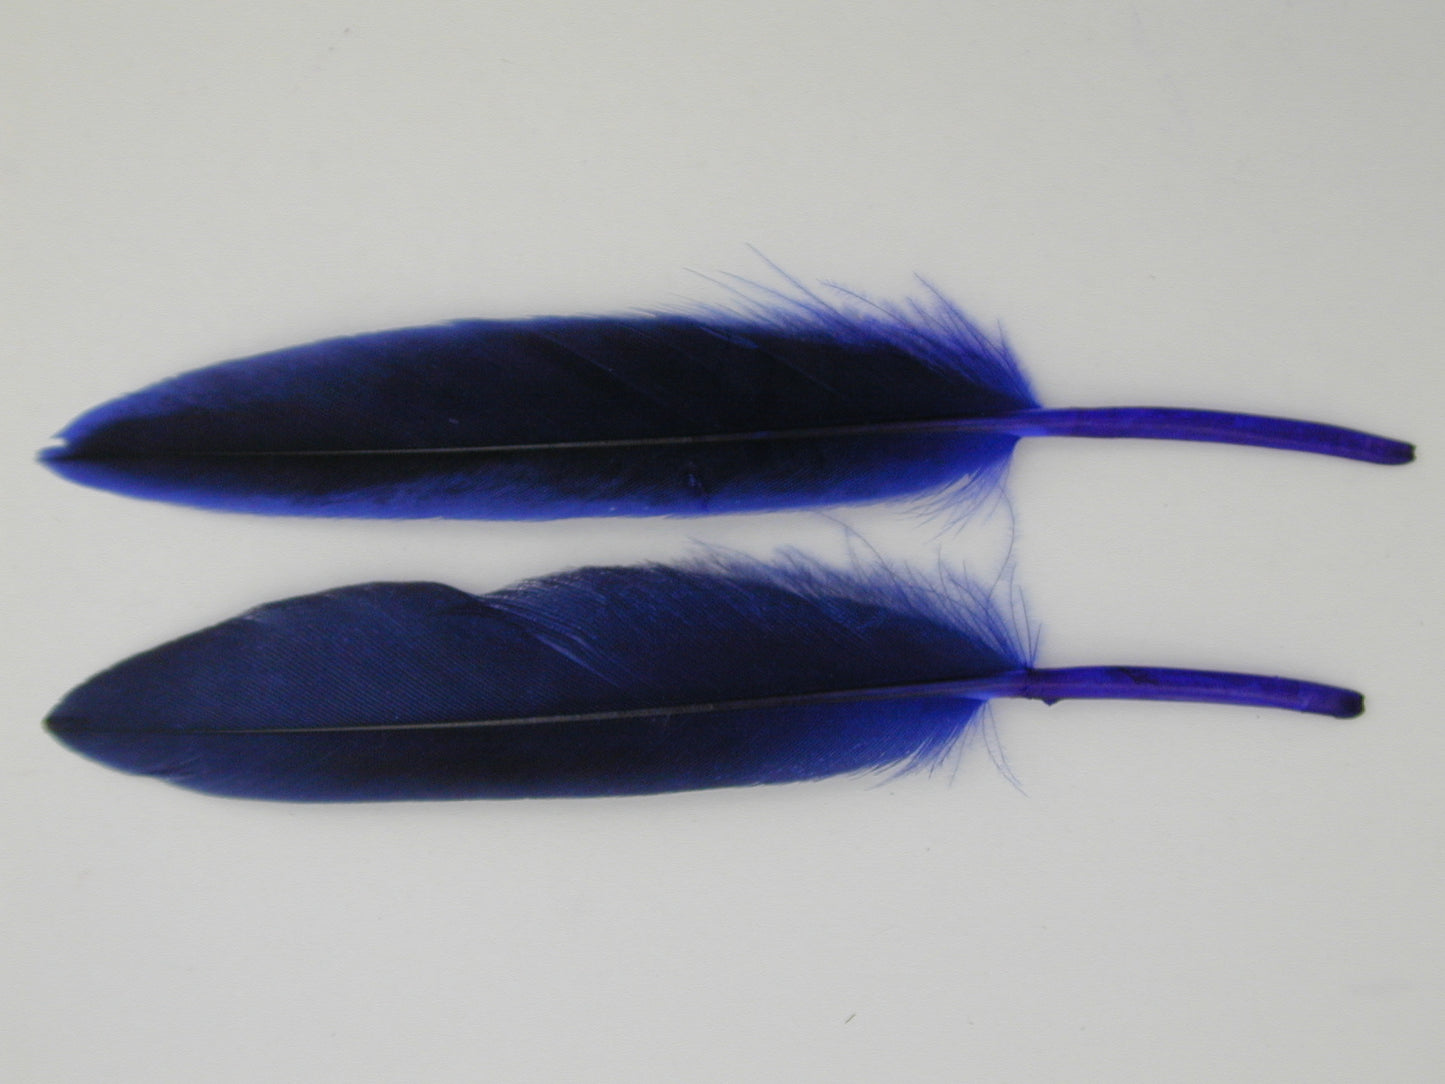 6 Blue Feathers